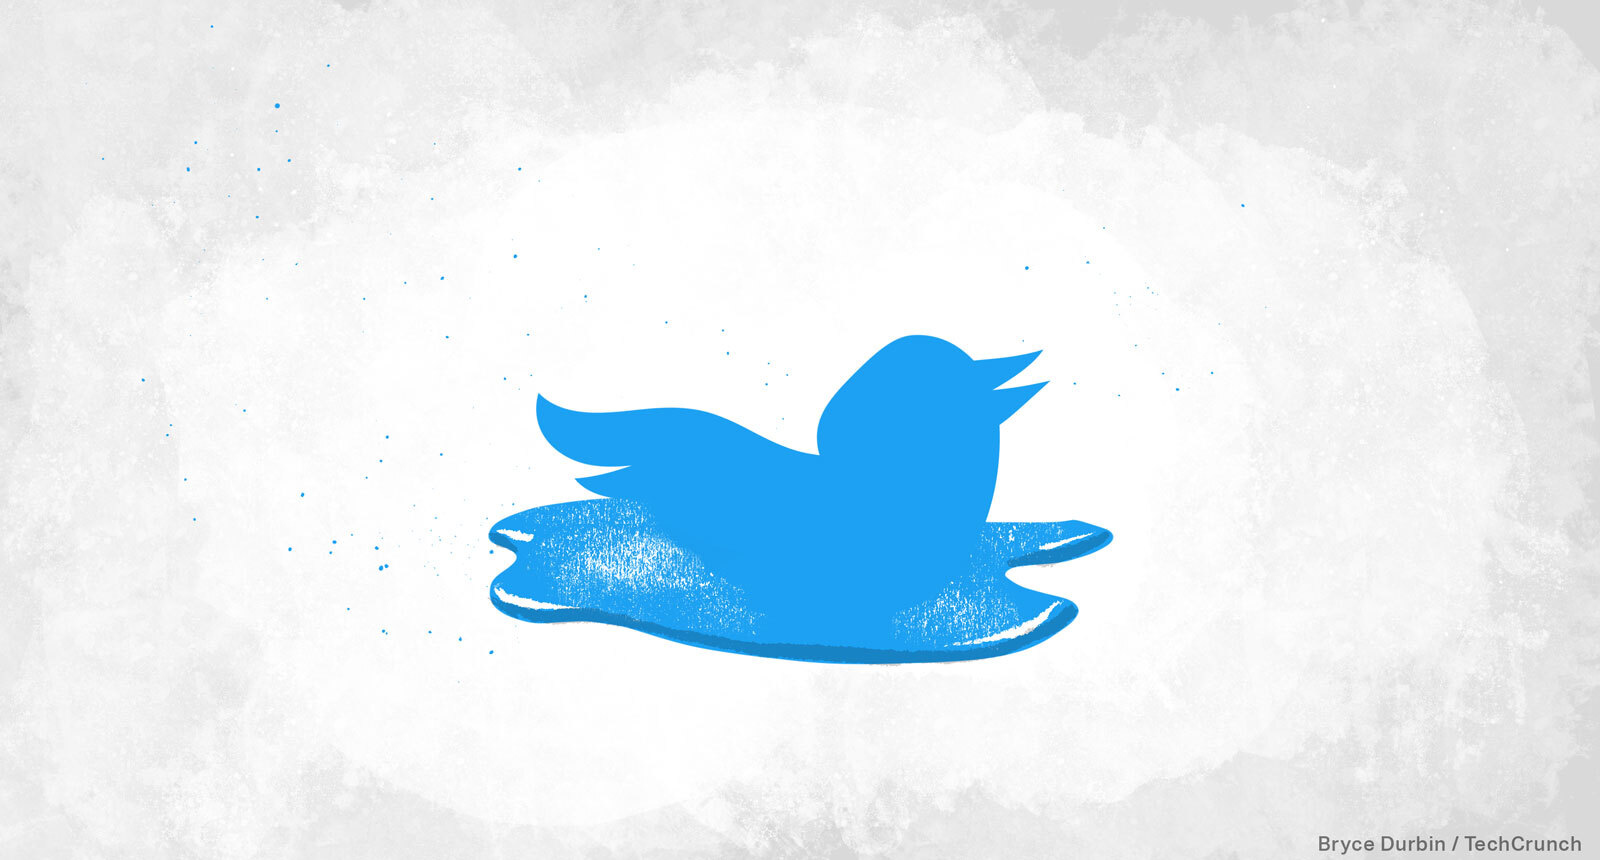 Twitter’s restrictive API may leave researchers out in the cold